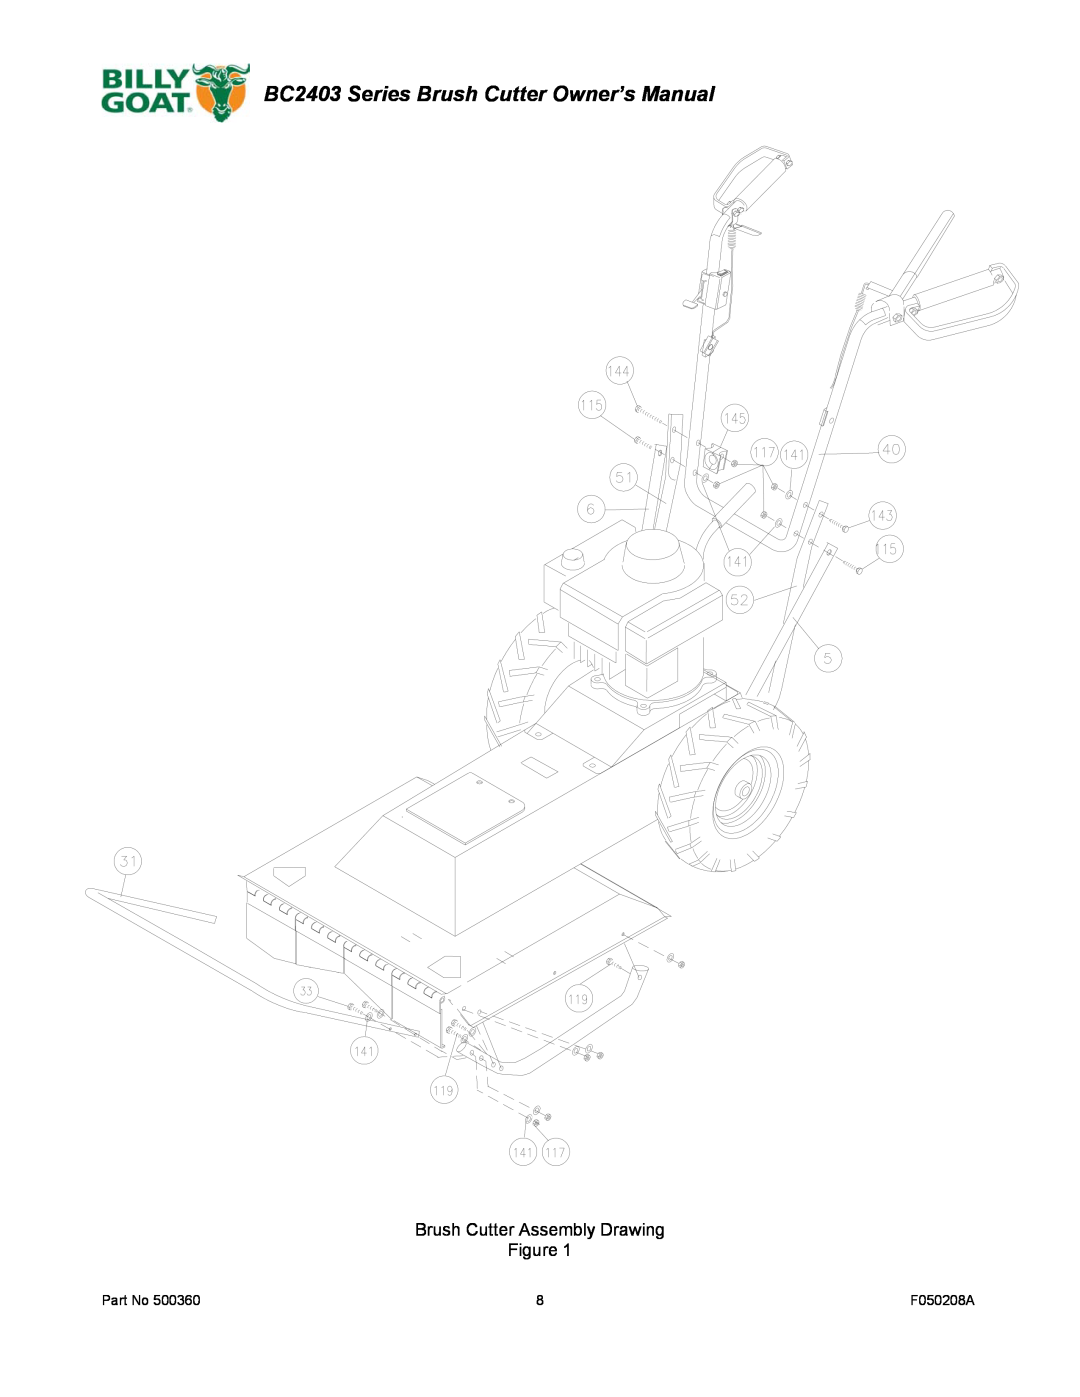 Billy Goat owner manual BC2403 Series Brush Cutter Owner’s Manual, Brush Cutter Assembly Drawing, F050208A 